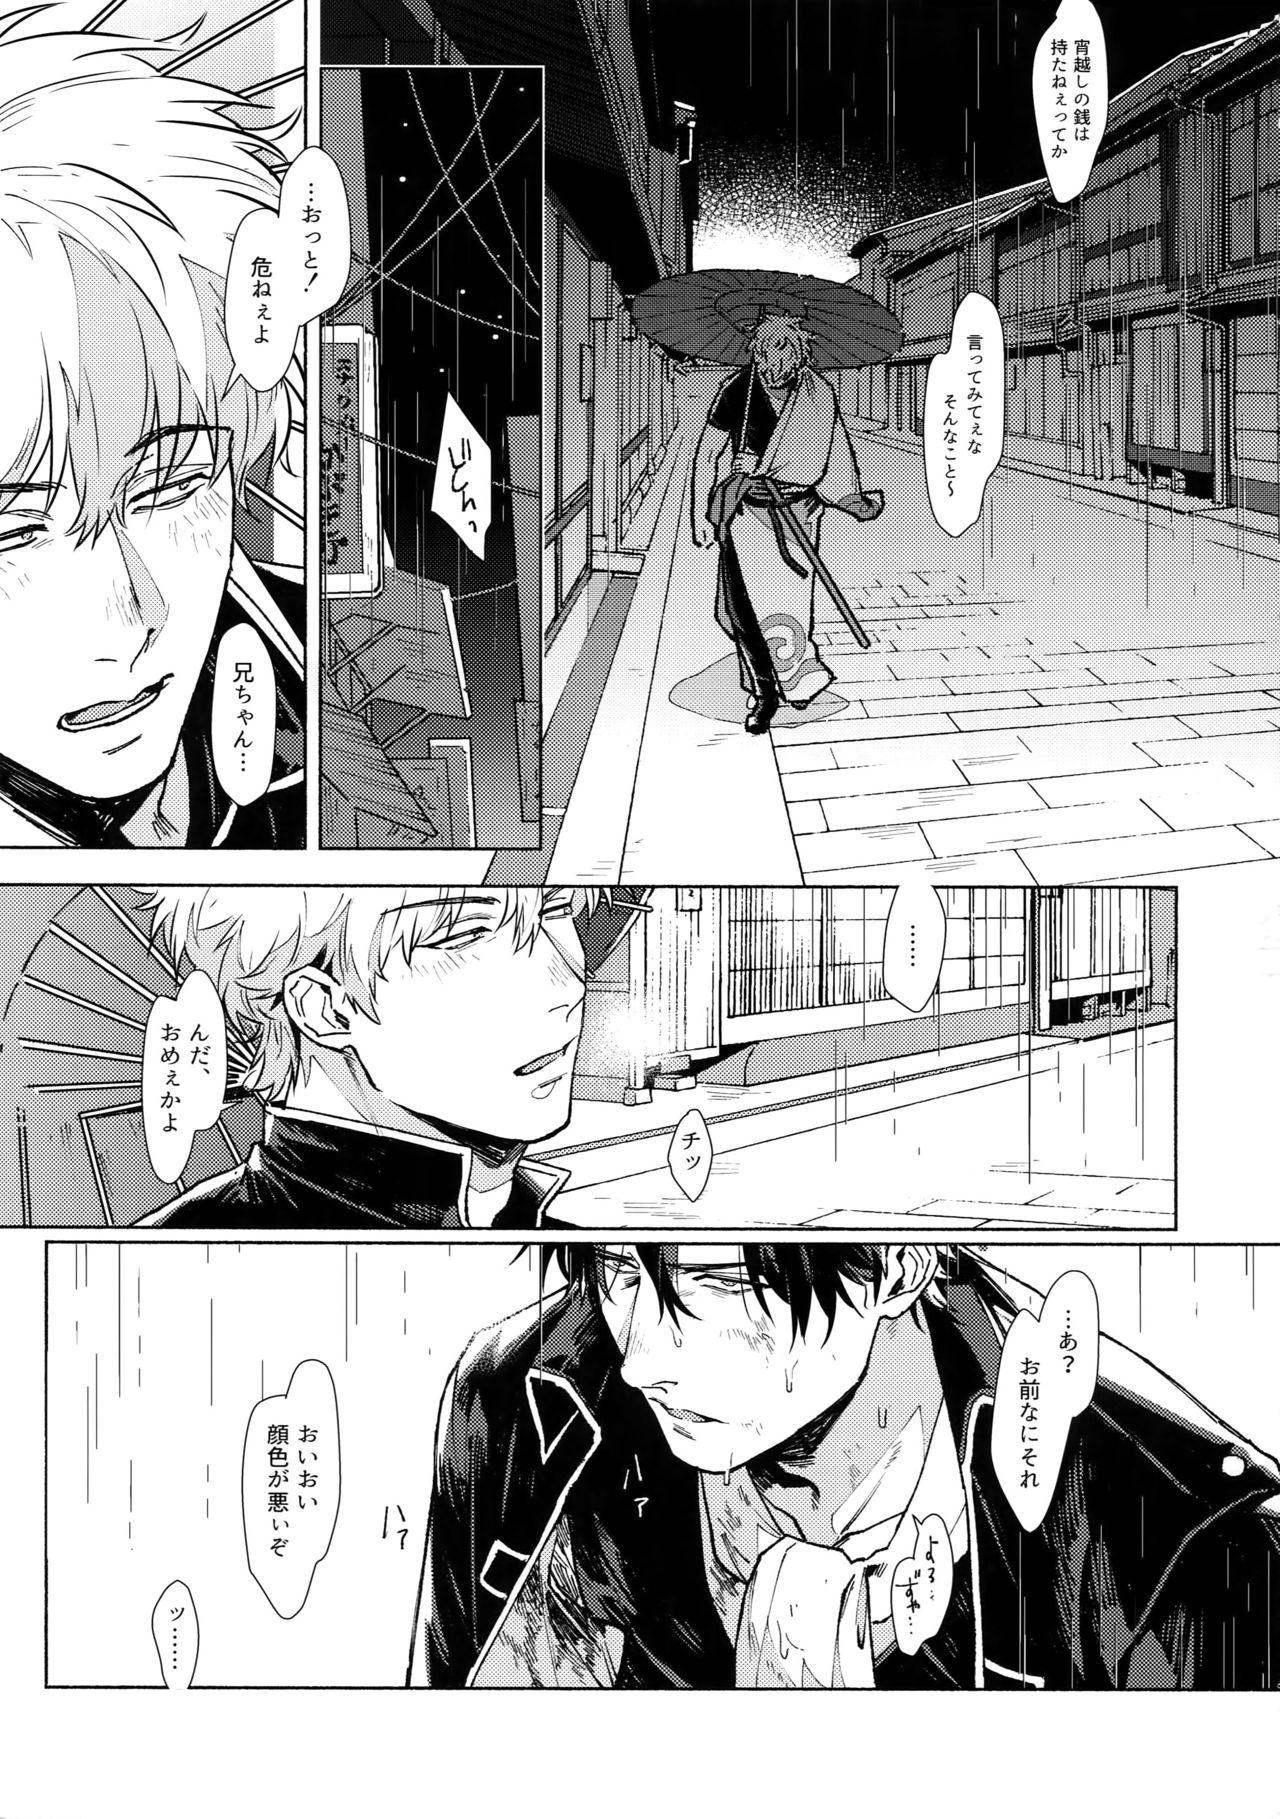 Money VOID - Gintama Best Blowjob - Page 6